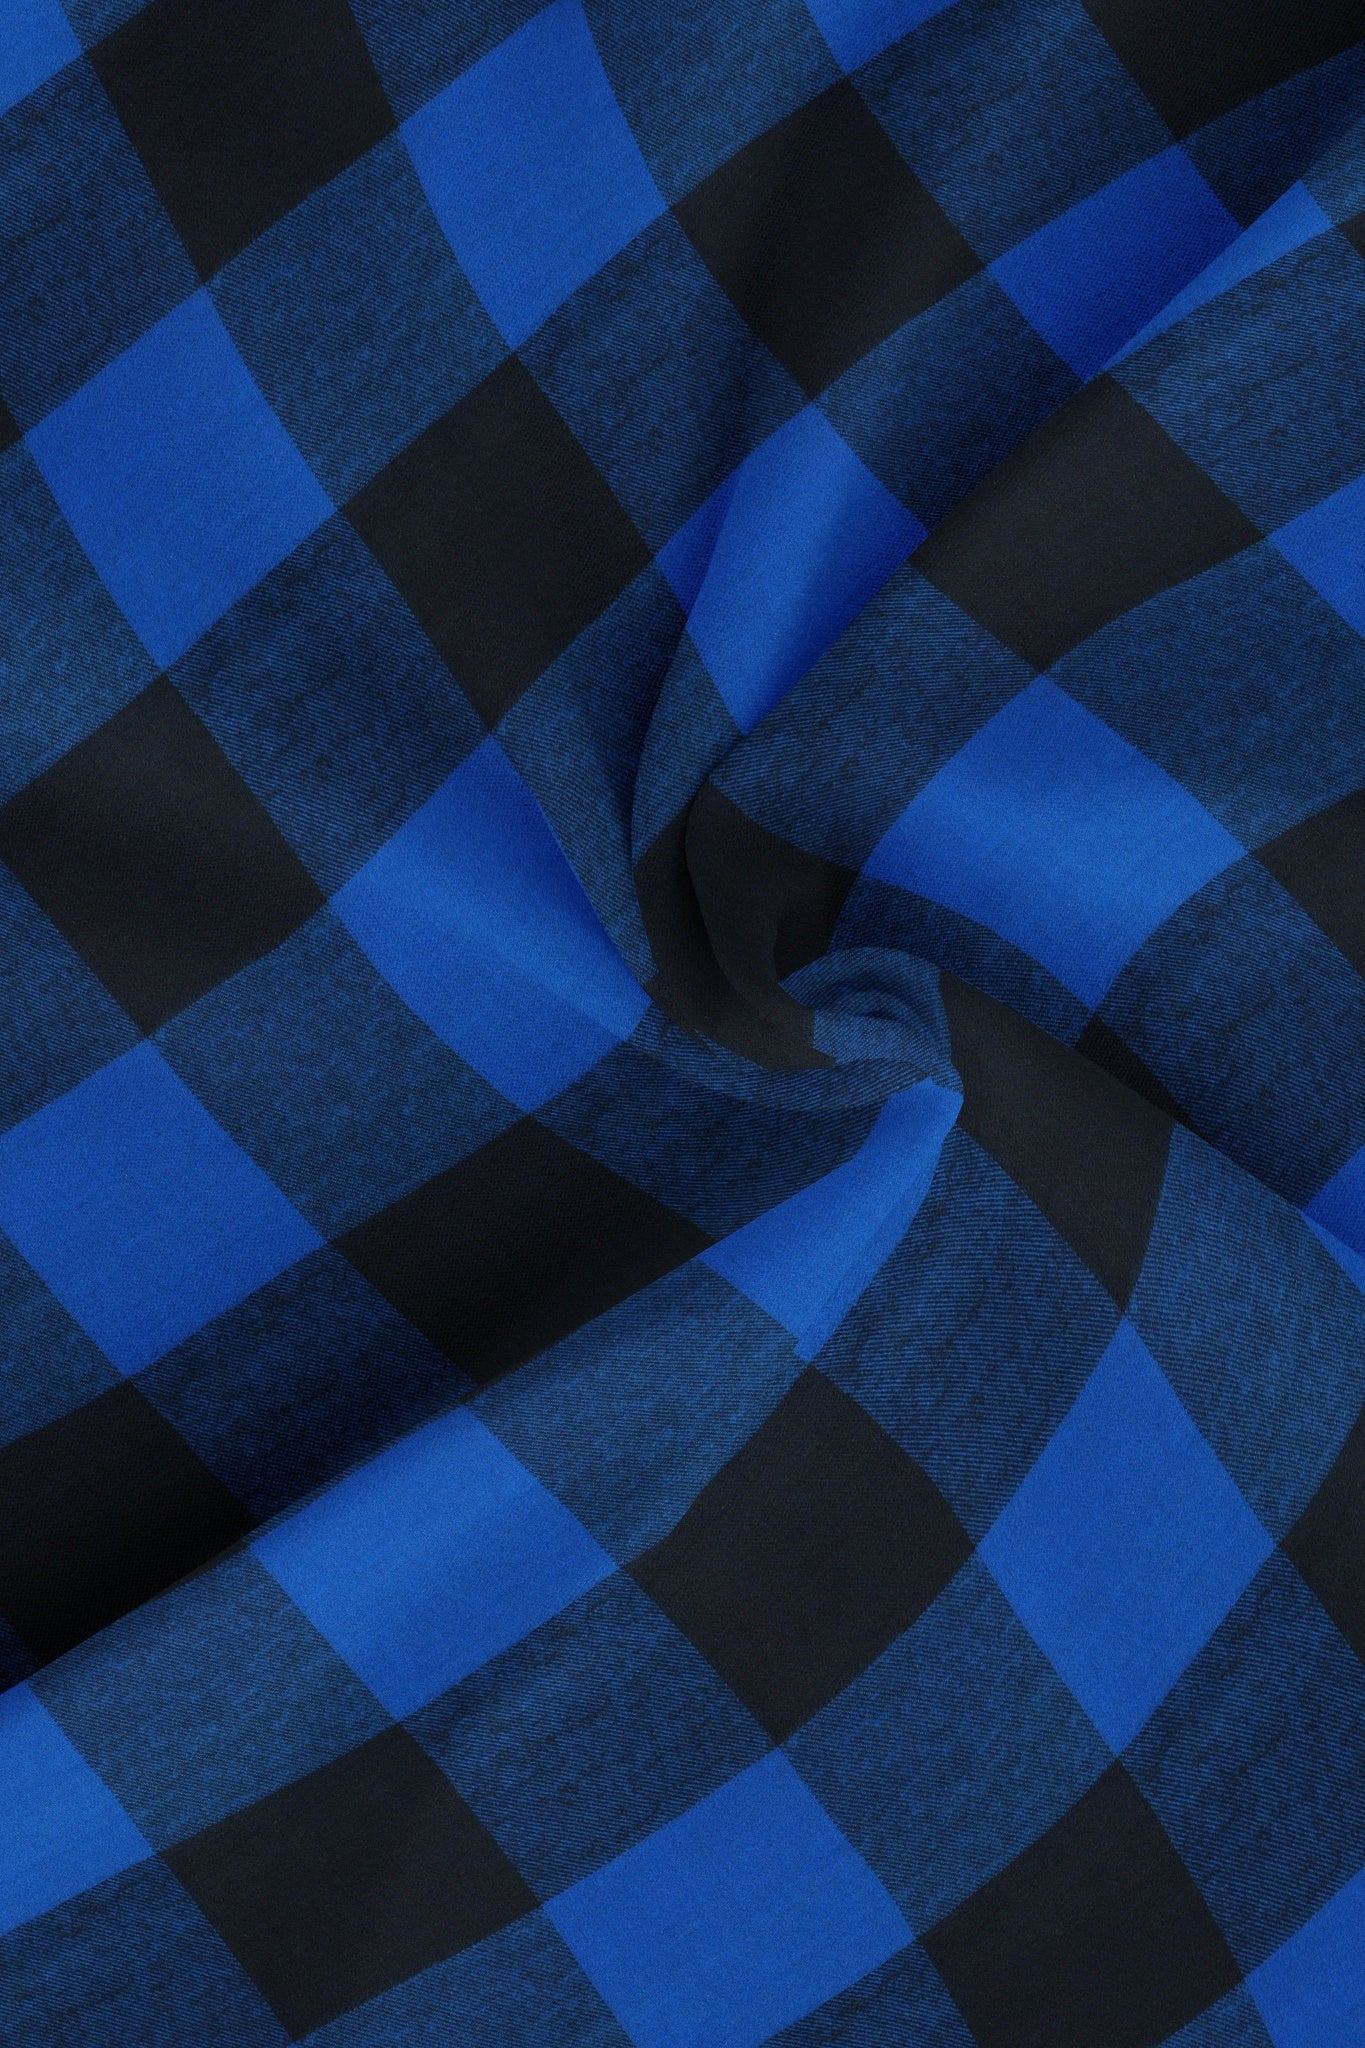 Endeavour Blue with Jade Black Buffalo Checked Flannel Shirt